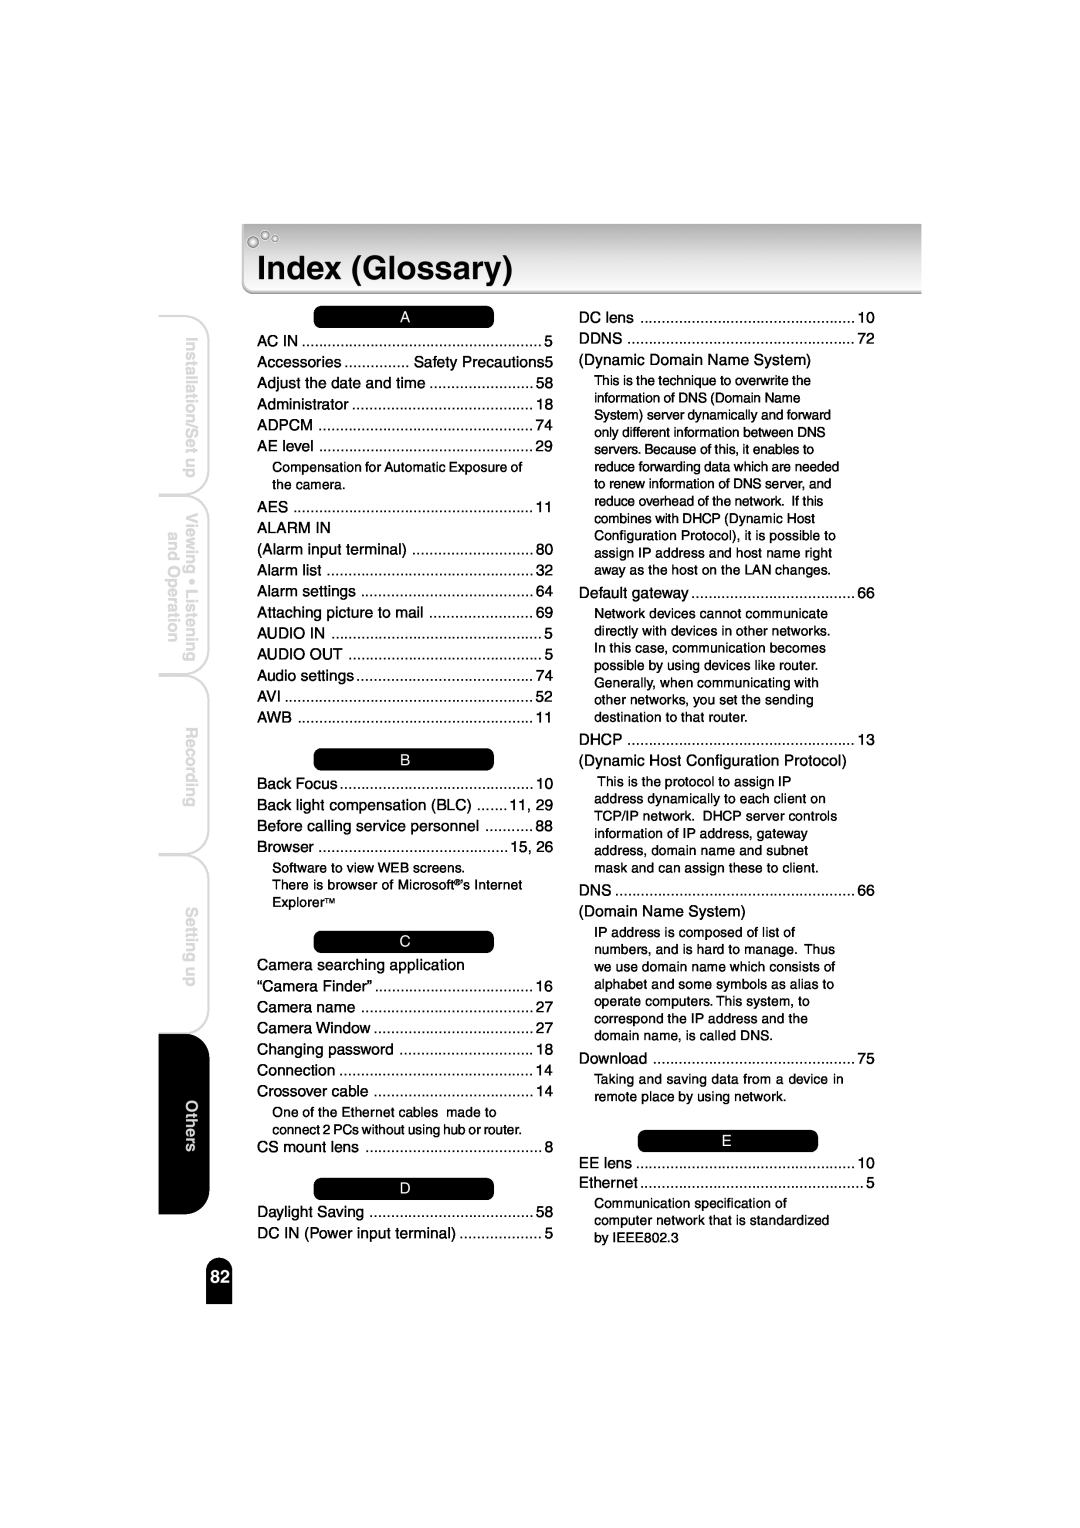 Toshiba IK-WB02A manual Index Glossary, Installation/Set up, Recording Setting up Others 